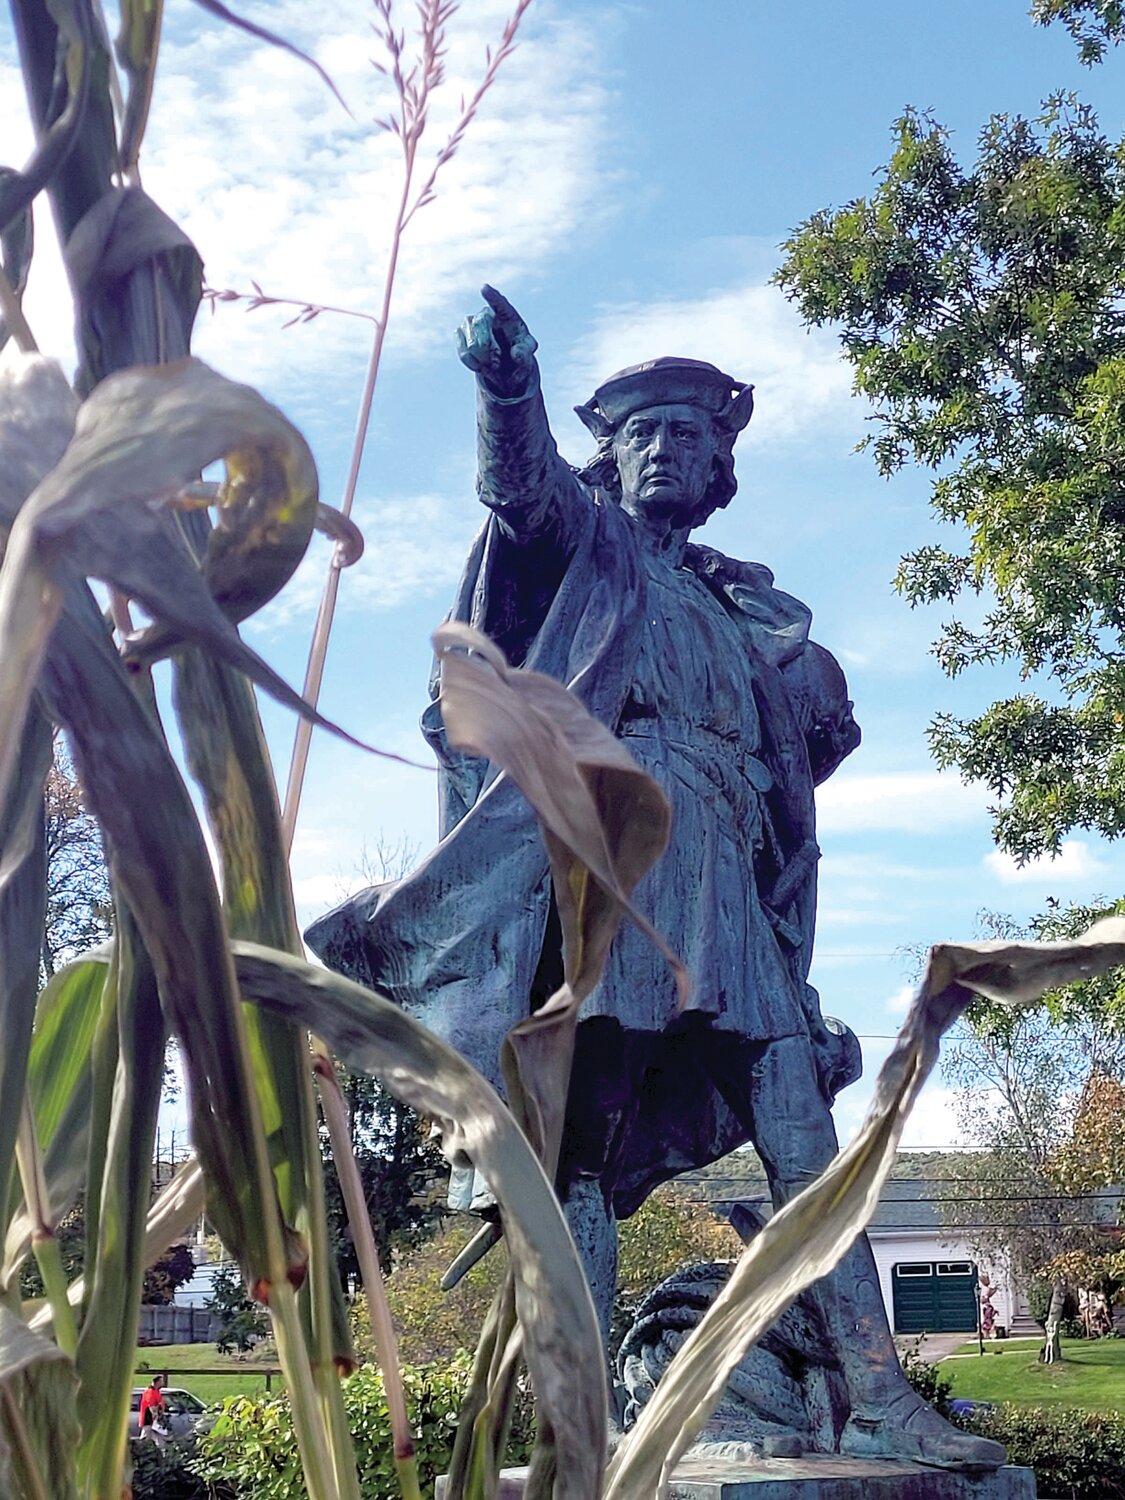 STATUE UNVEILED: The statue lived in Providence for 130 years. It was vandalized and removed and sat in storage before it was erected in Johnston’s War Memorial Park. On Monday, Columbus Day, the historic Christopher Columbus statue was unveiled to the public.